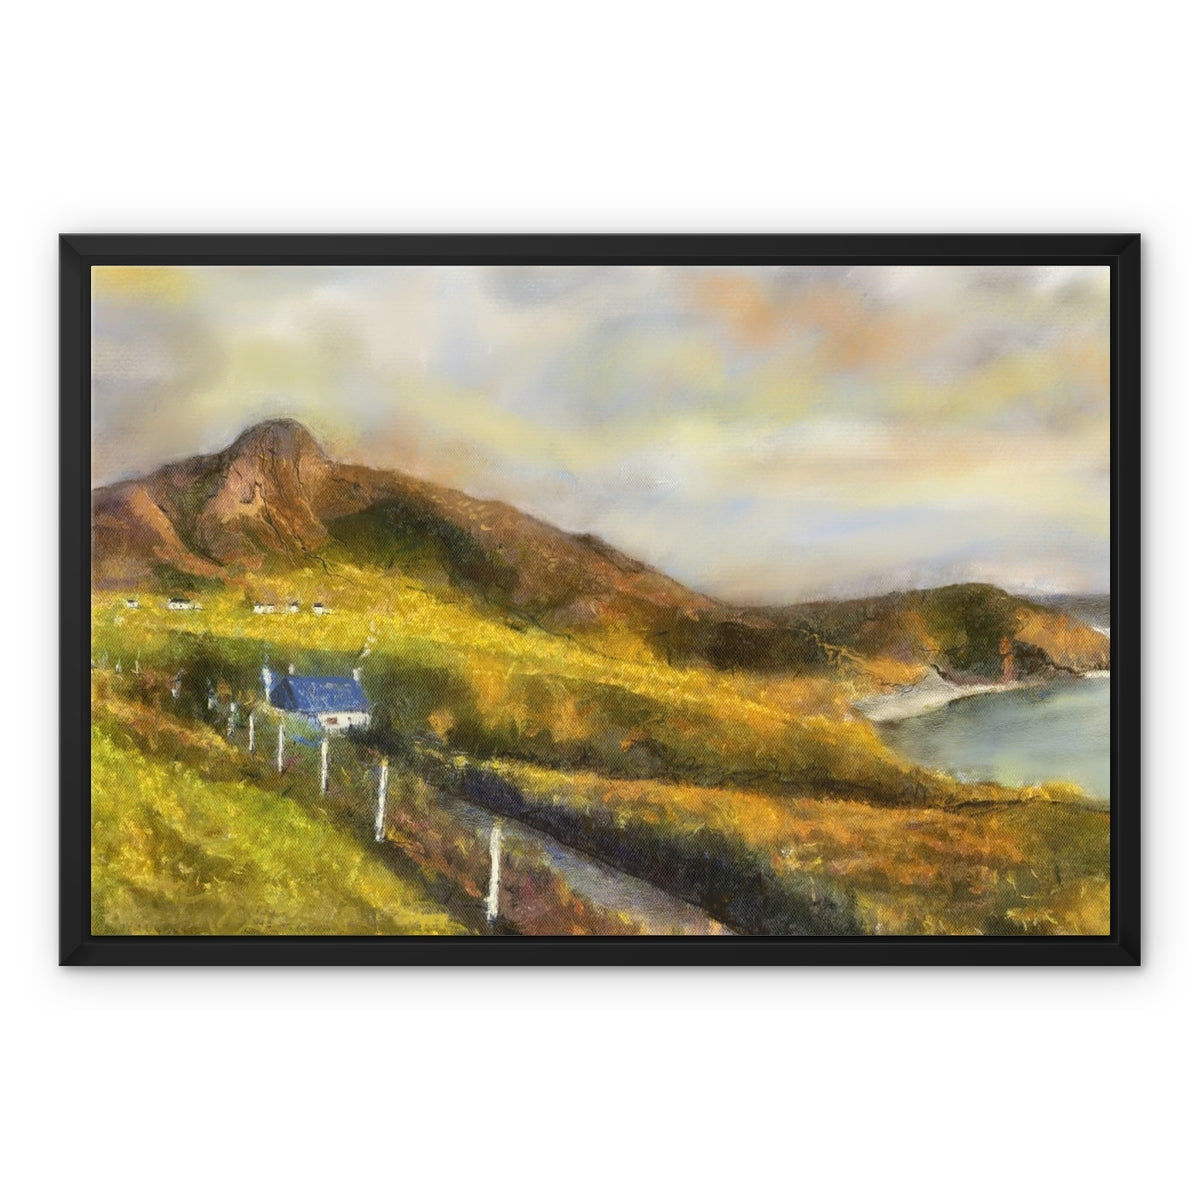 Coldbackie Painting | Framed Canvas From Scotland-Floating Framed Canvas Prints-Scottish Highlands & Lowlands Art Gallery-24"x18"-Paintings, Prints, Homeware, Art Gifts From Scotland By Scottish Artist Kevin Hunter